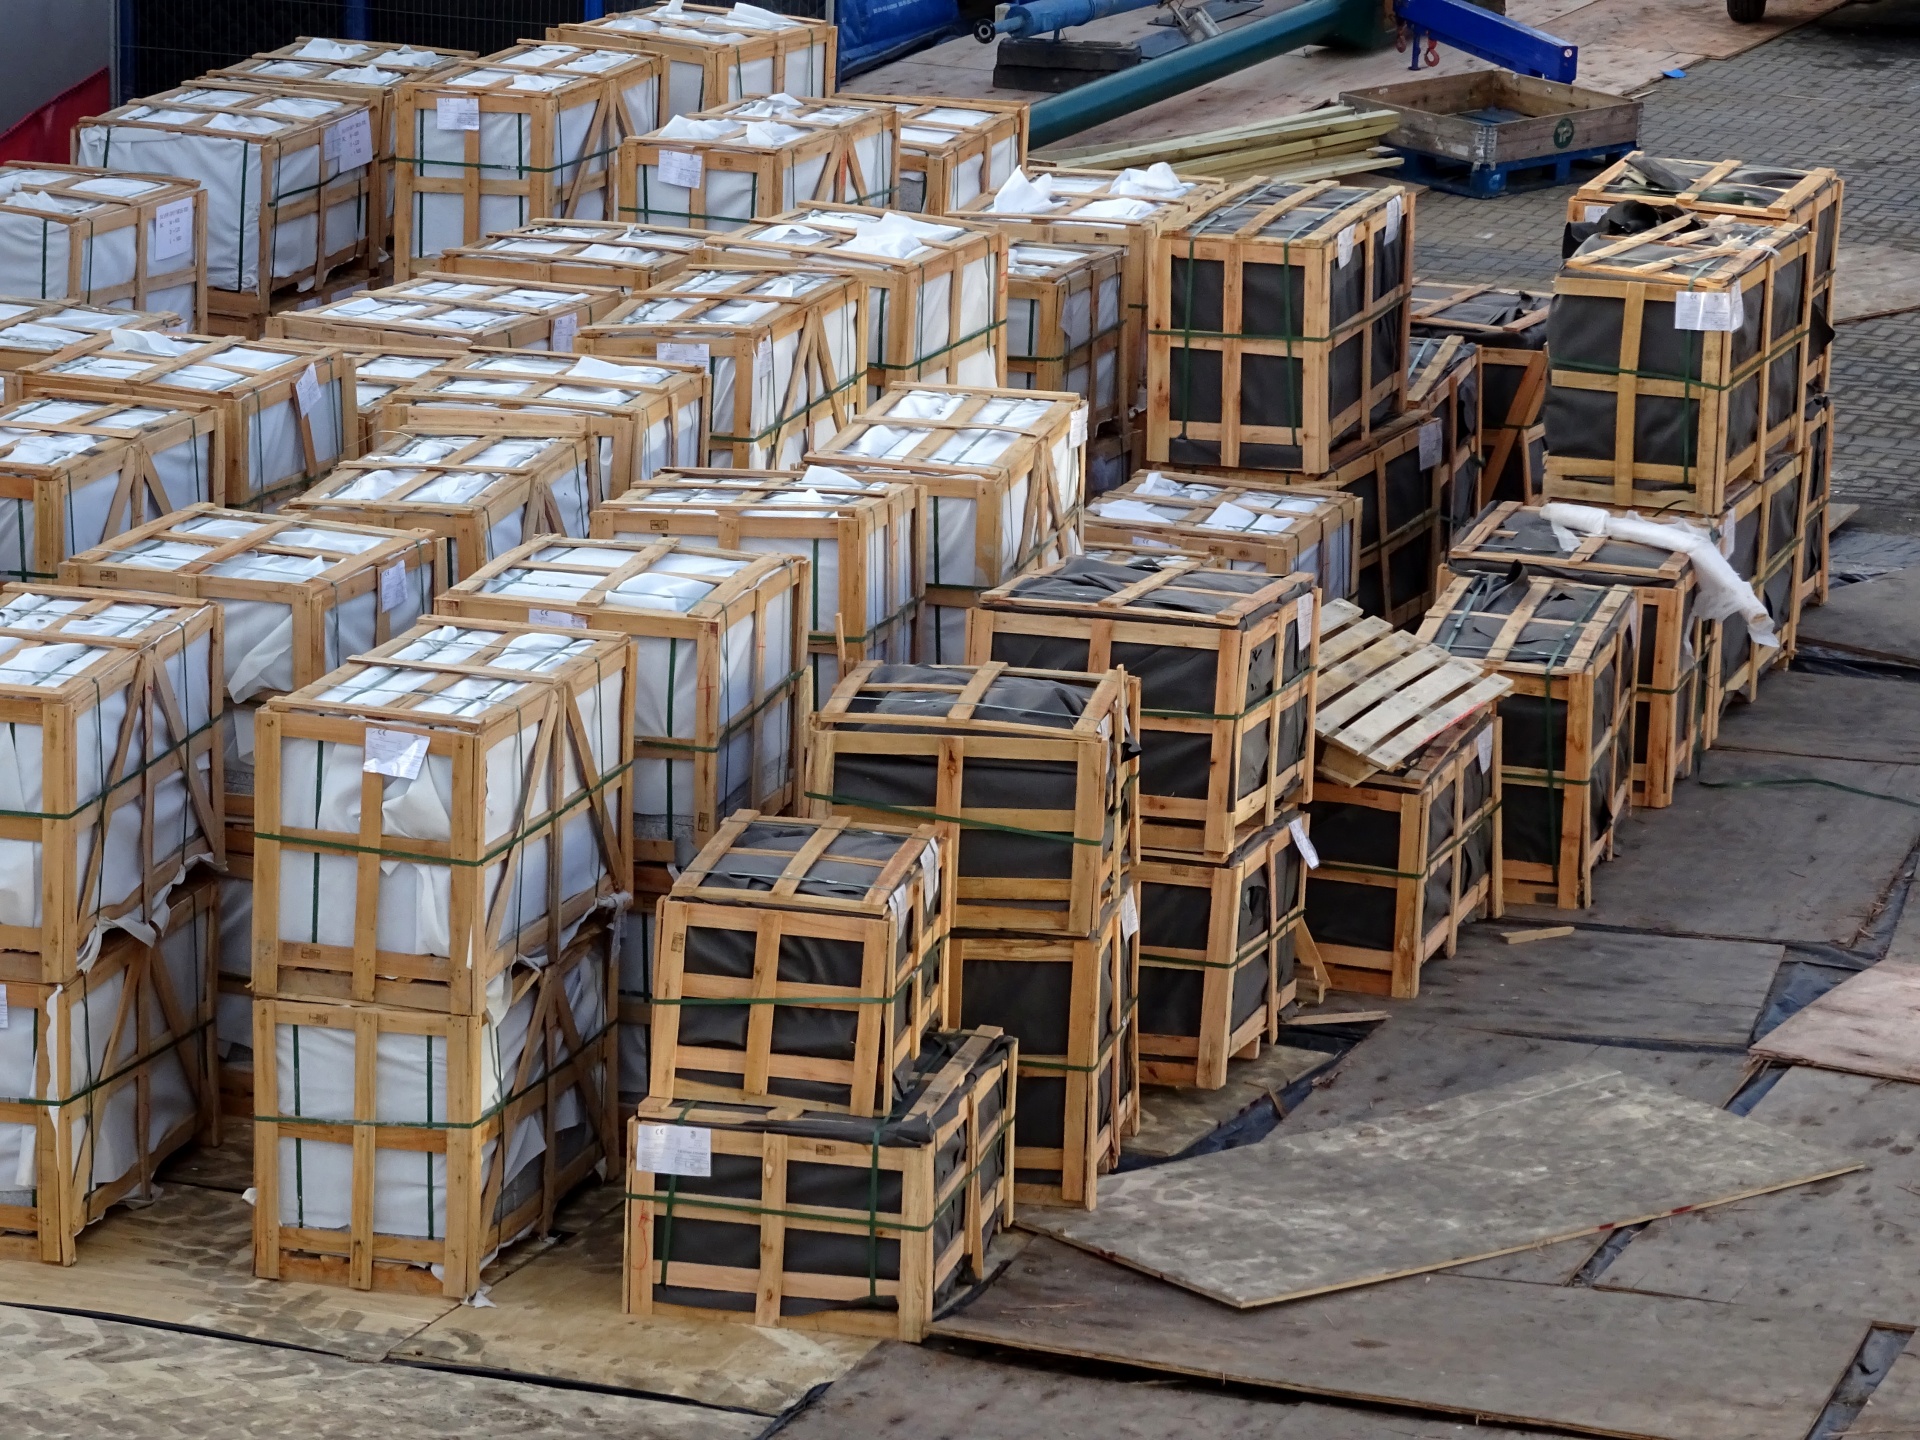 Packing Crates Waiting To Be Picked Up